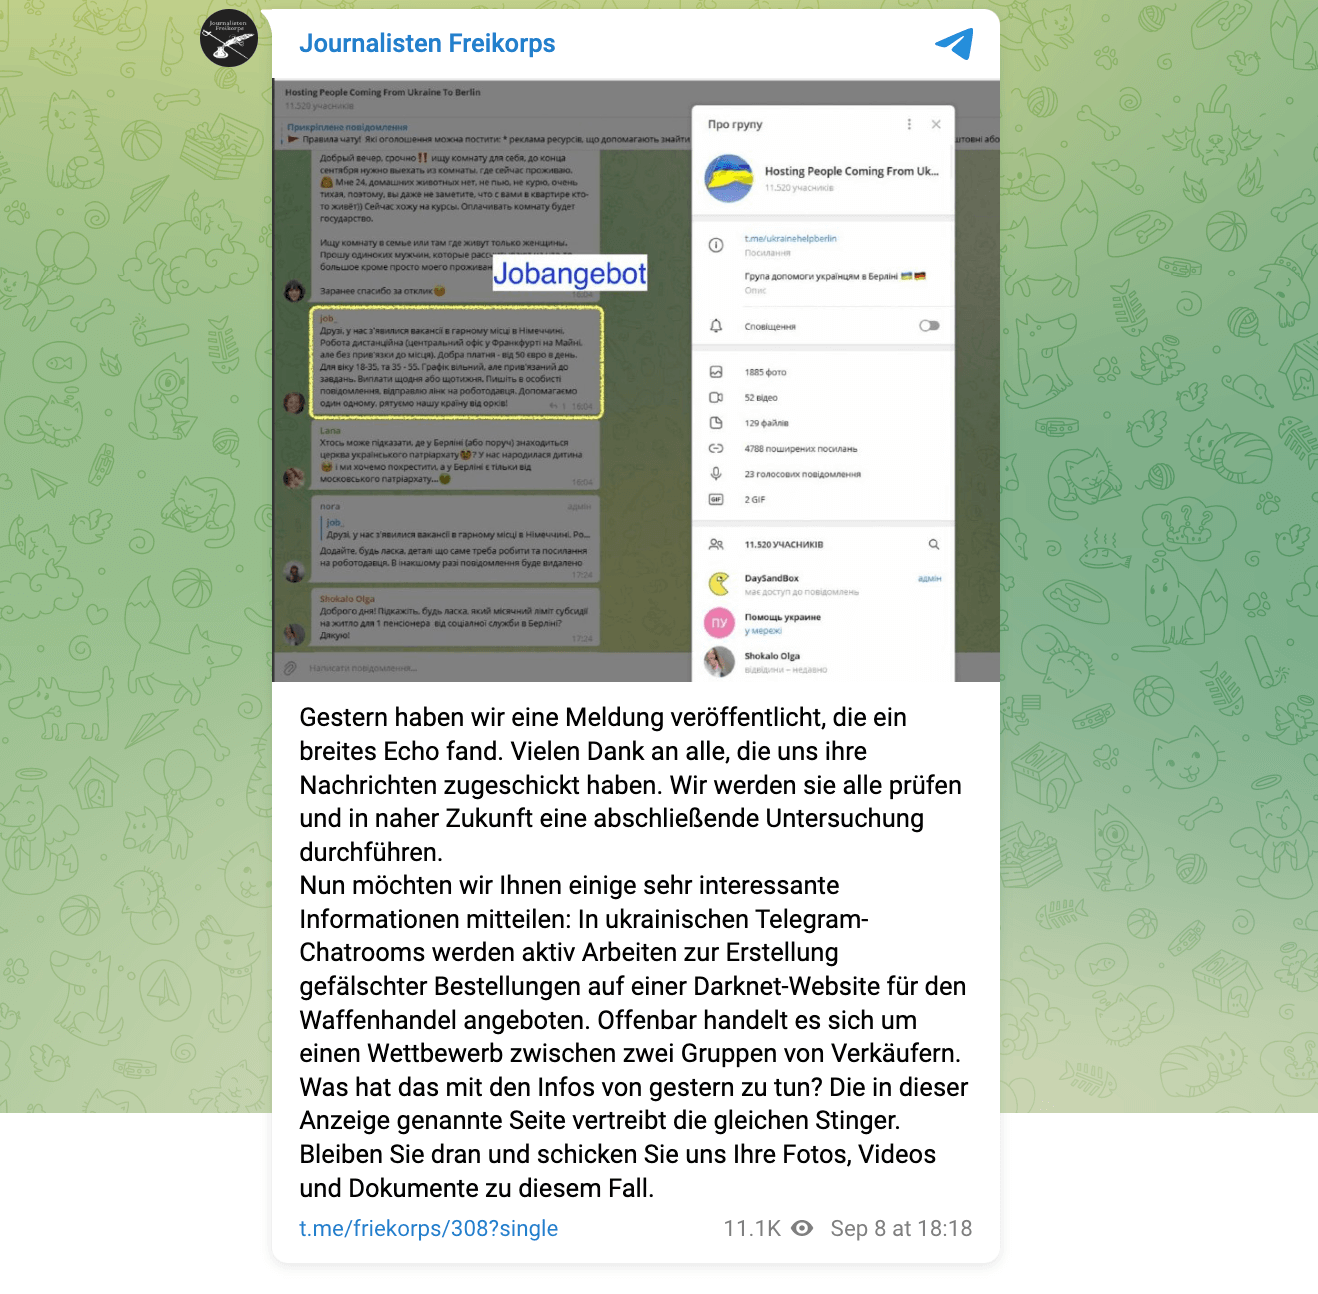 Telegram post by „Journalisten Freikorps“on September 8. Accordingly, a Ukrainian channel für refugees in Berlin shared a job offer in connection to alleged arms smuggling 